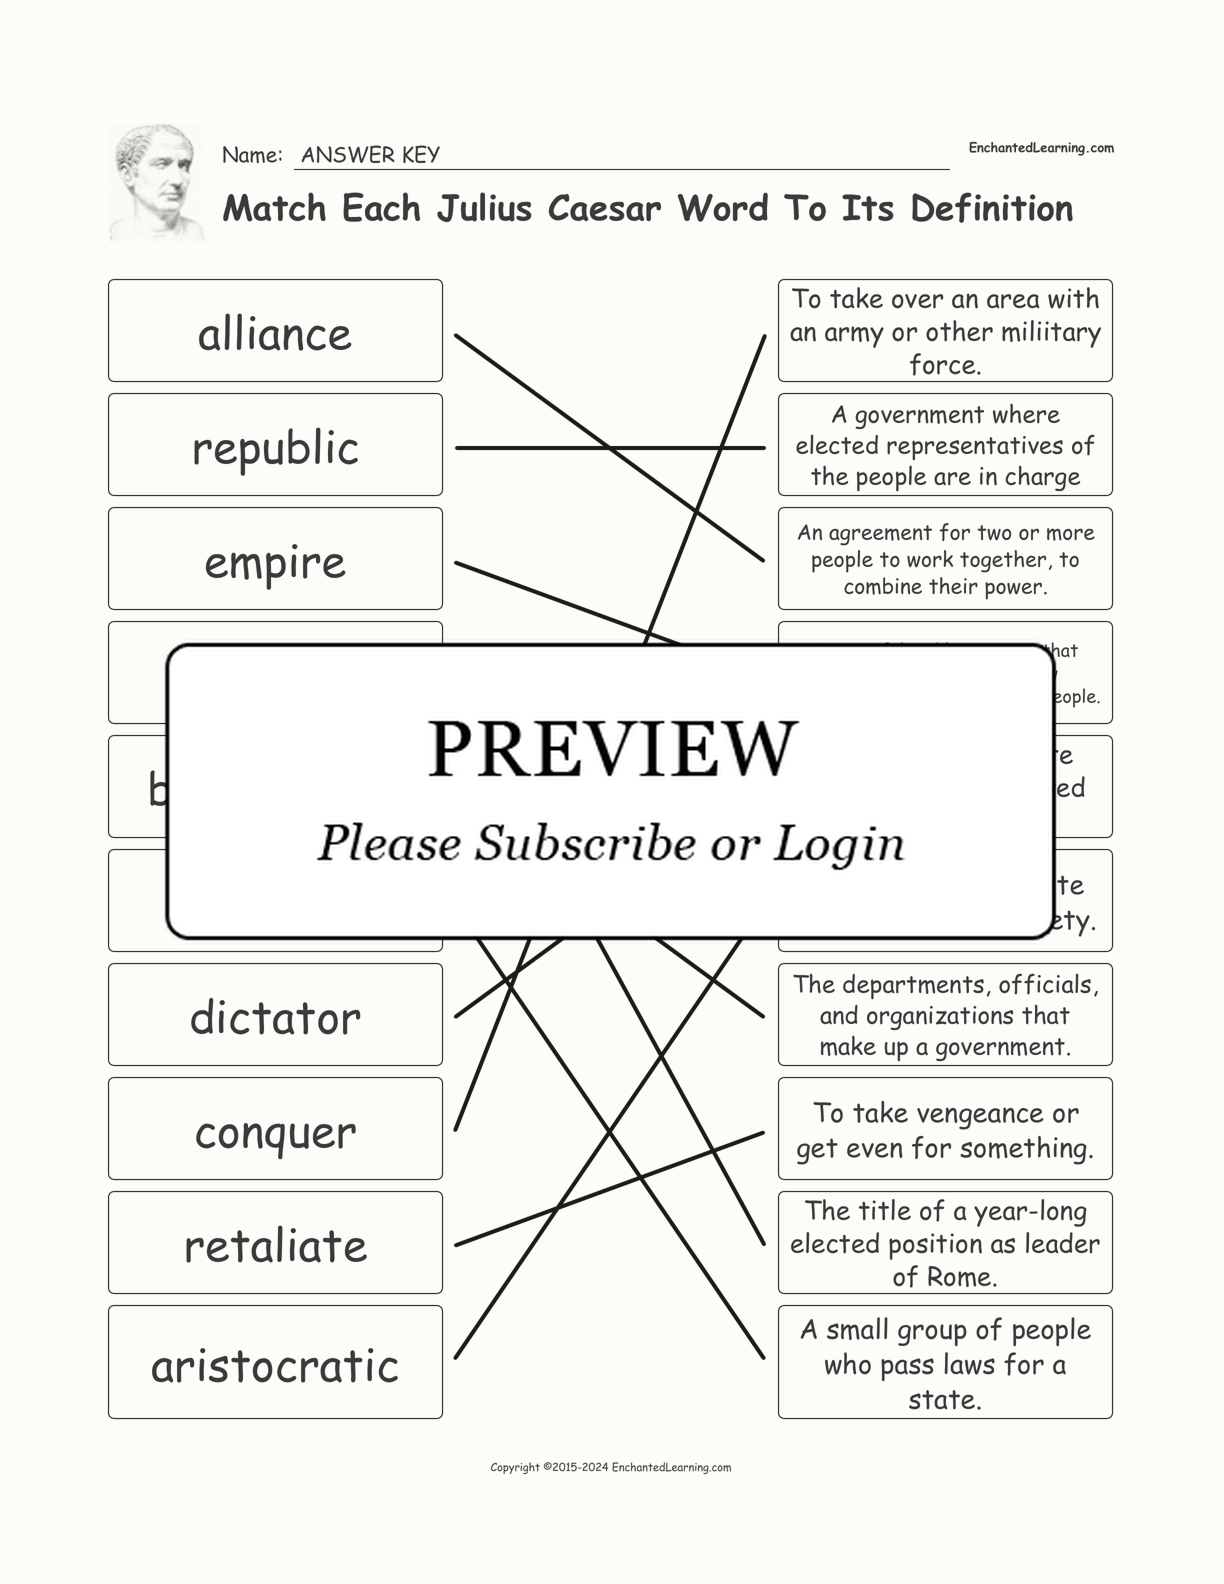 Match Each Julius Caesar Word To Its Definition interactive worksheet page 2